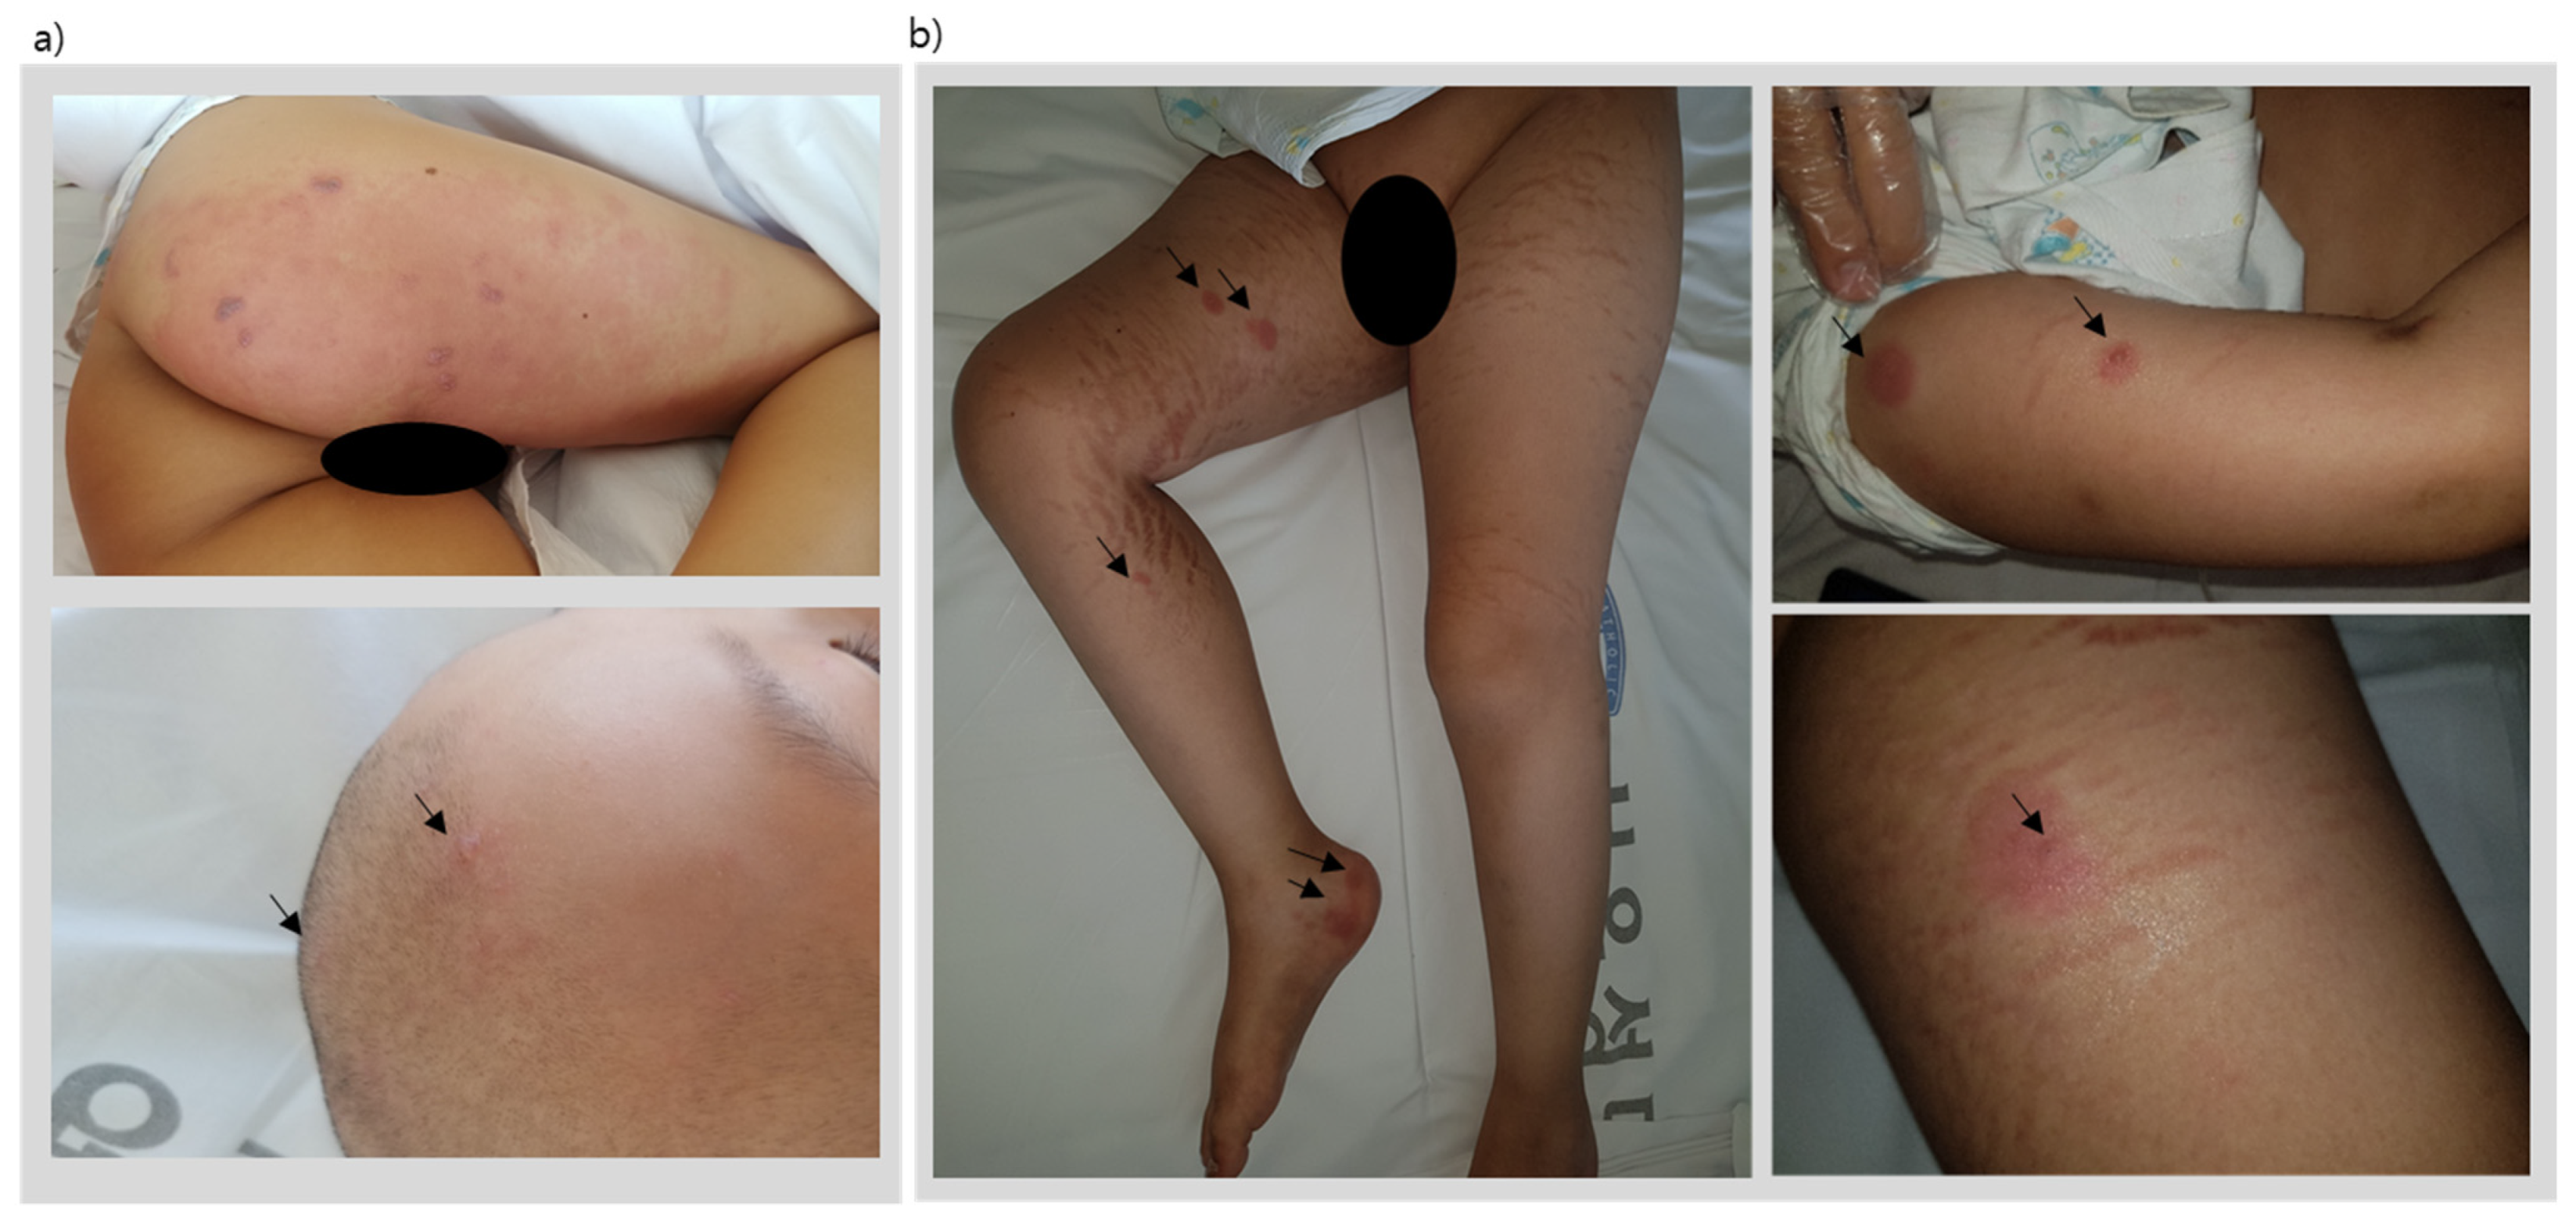 Children | Free Full-Text | A Case of Disseminated Herpes Zoster Presenting  as Vesicles Limited to Skin Lesions with Lymphoma Cutis Involvement